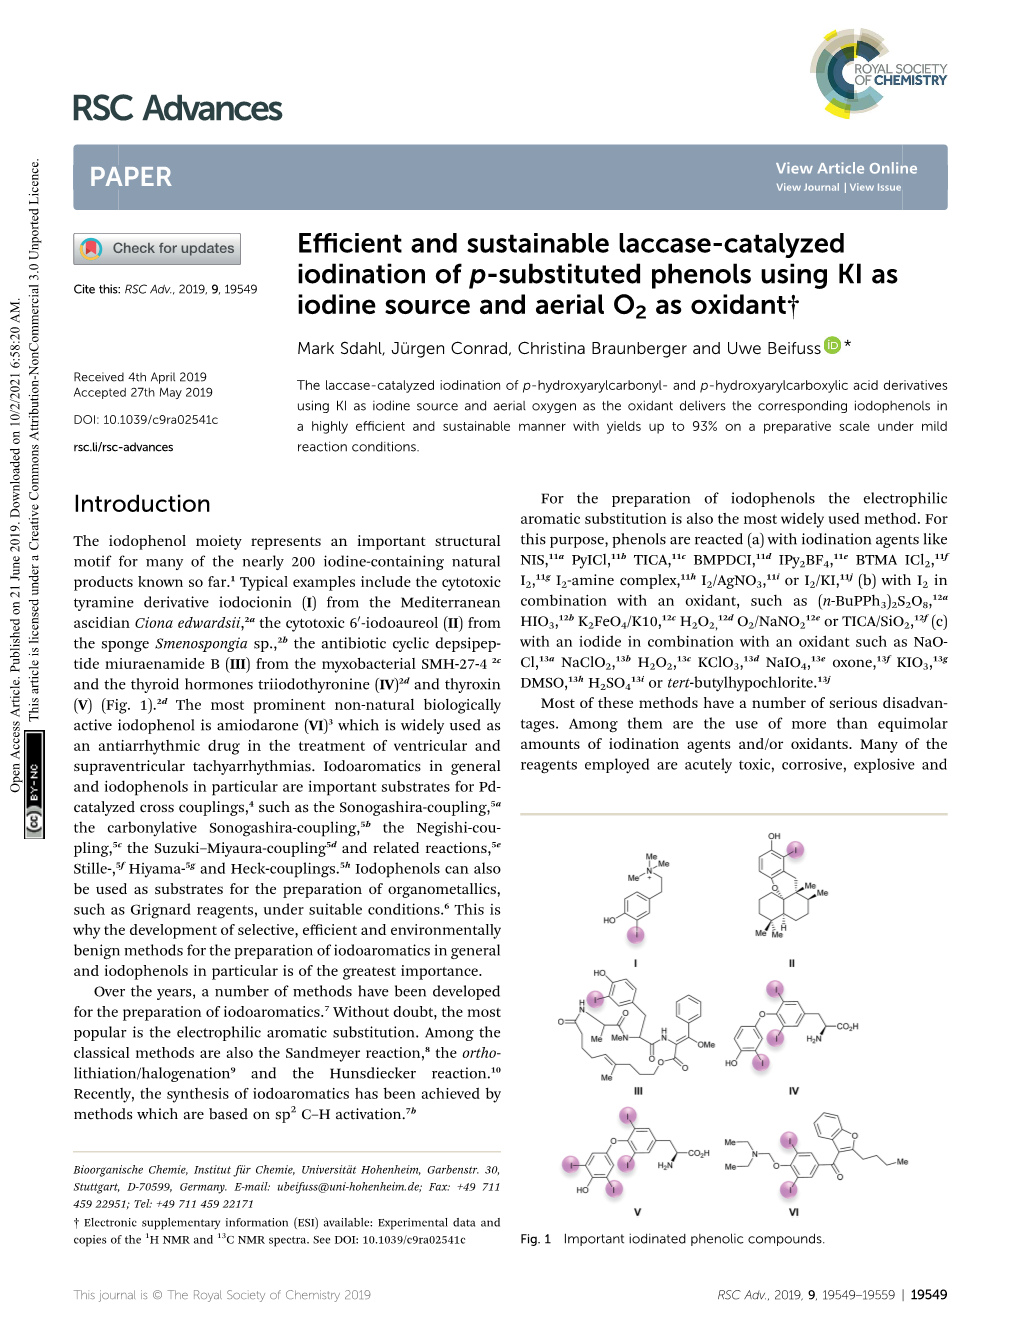 Efficient and Sustainable Laccase-Catalyzed Iodination of P